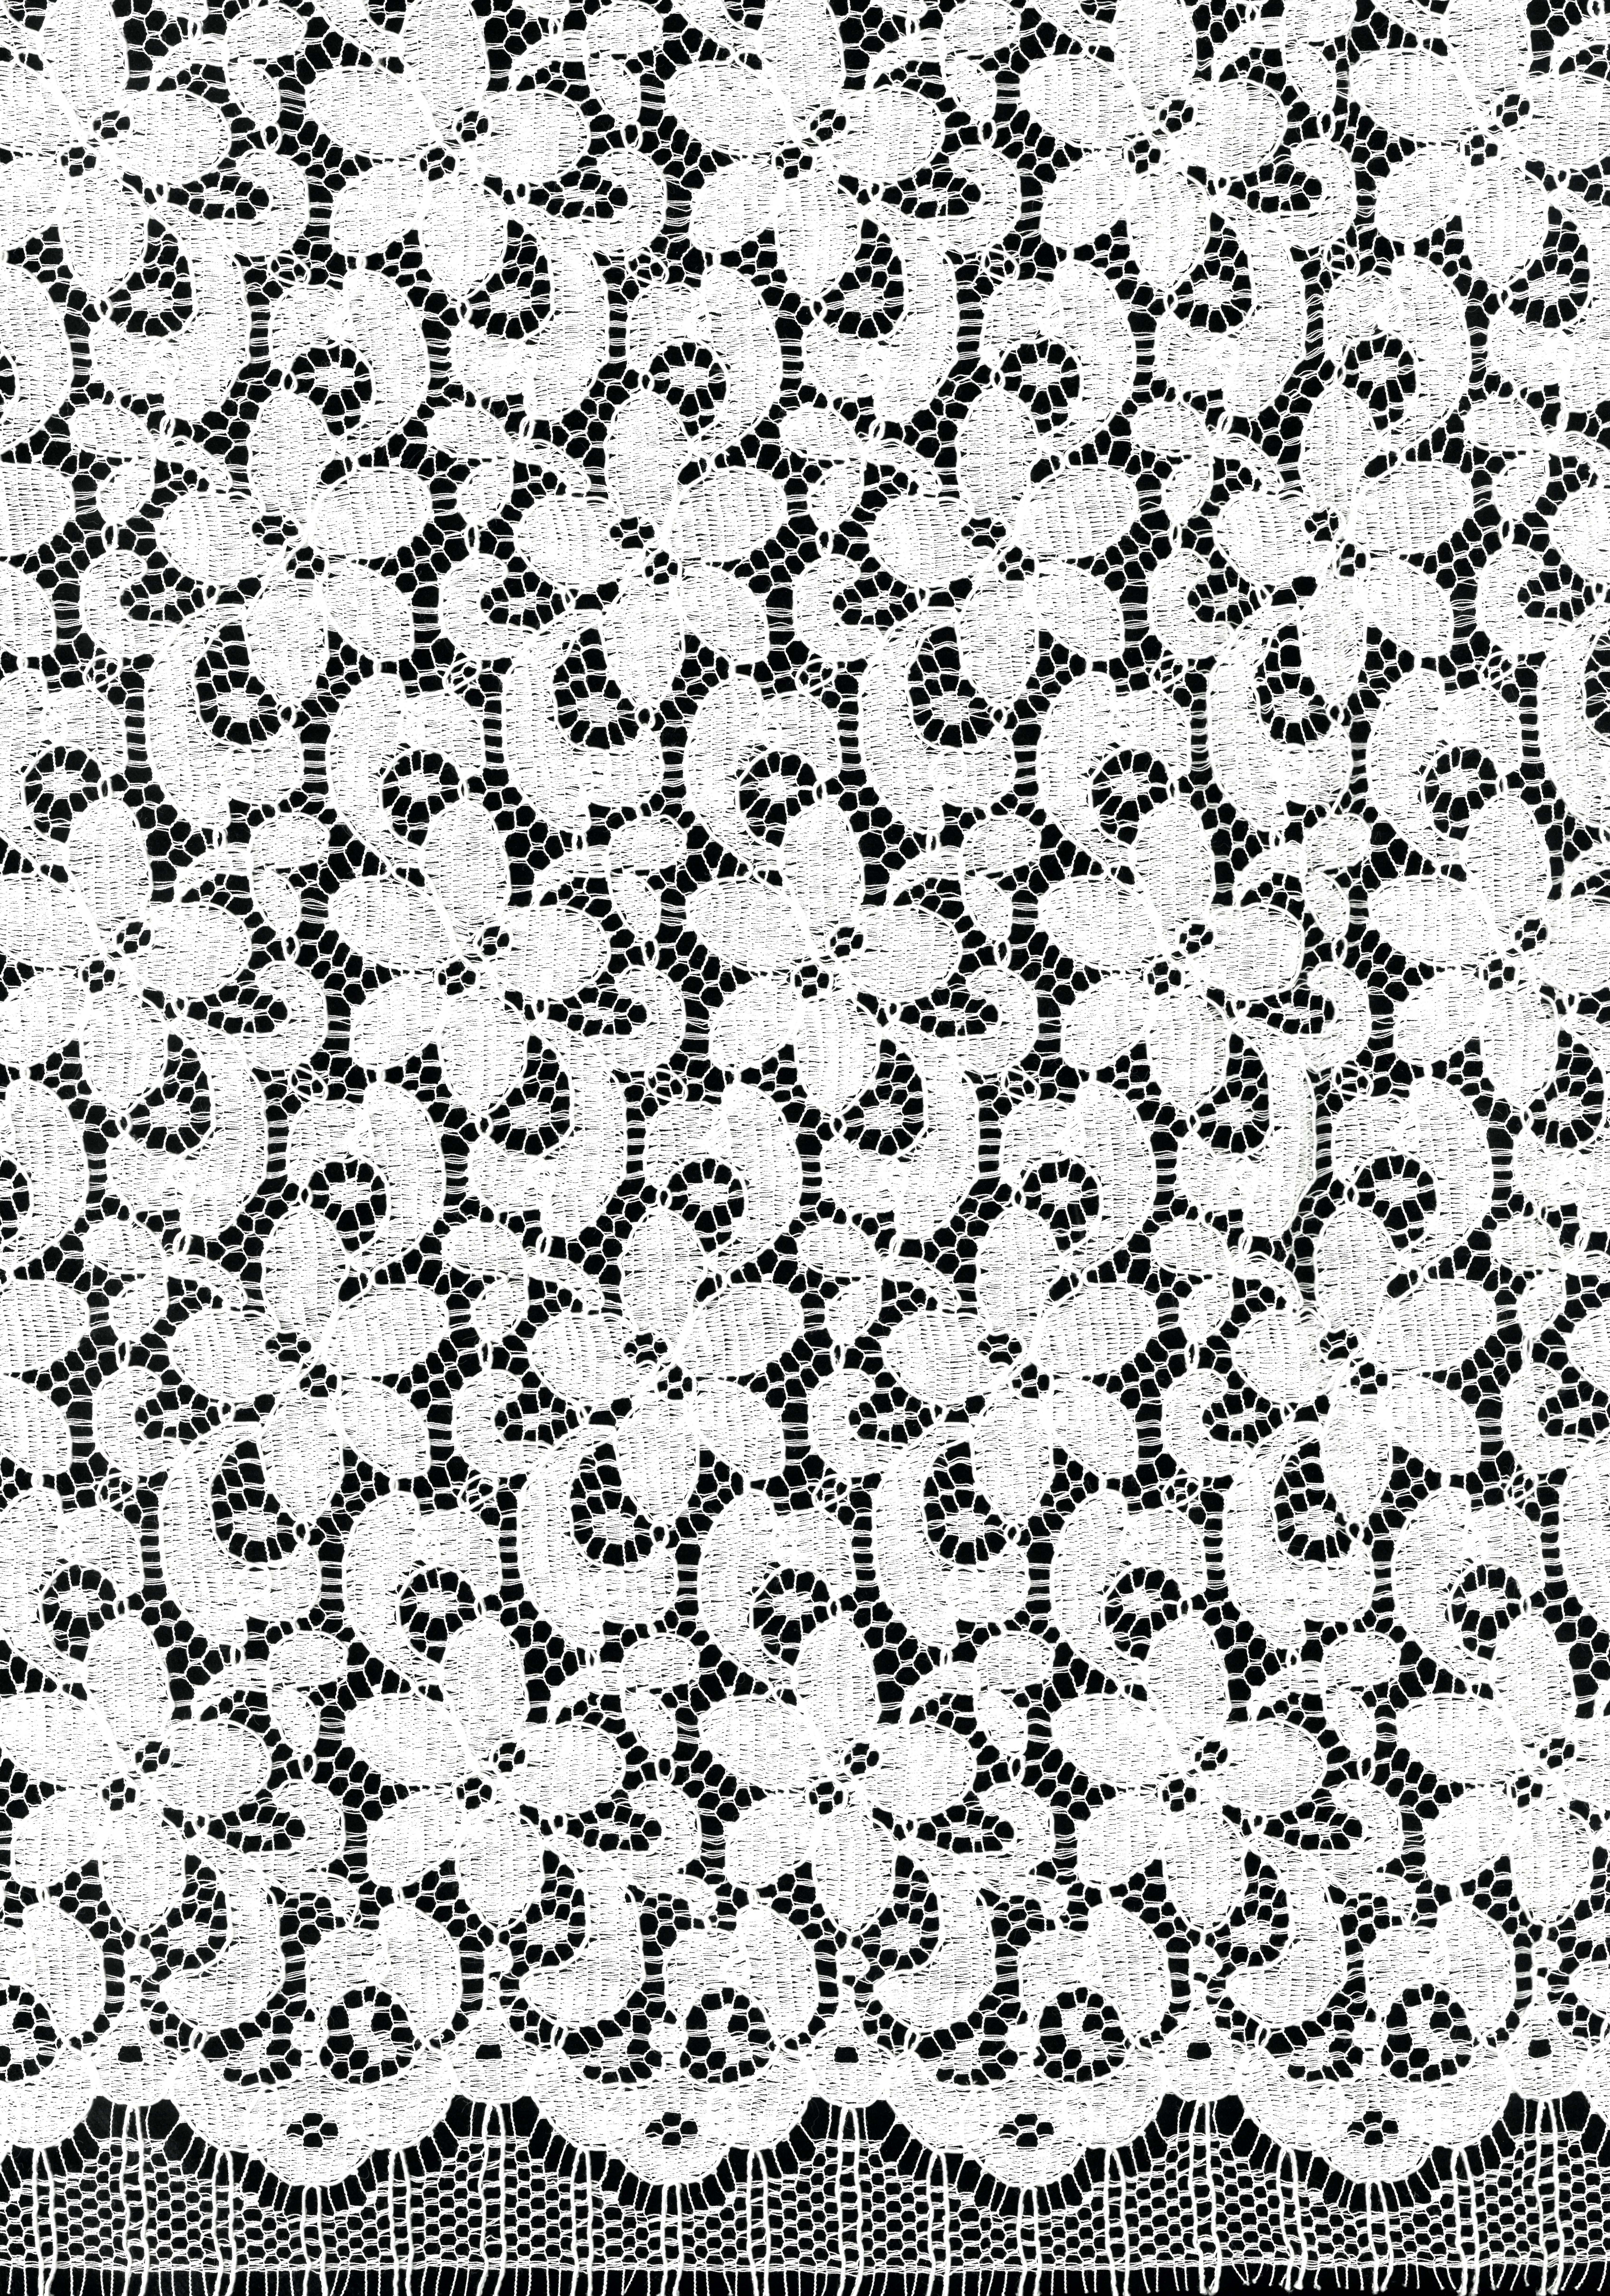 CORDED FRENCH LACE - IVORY